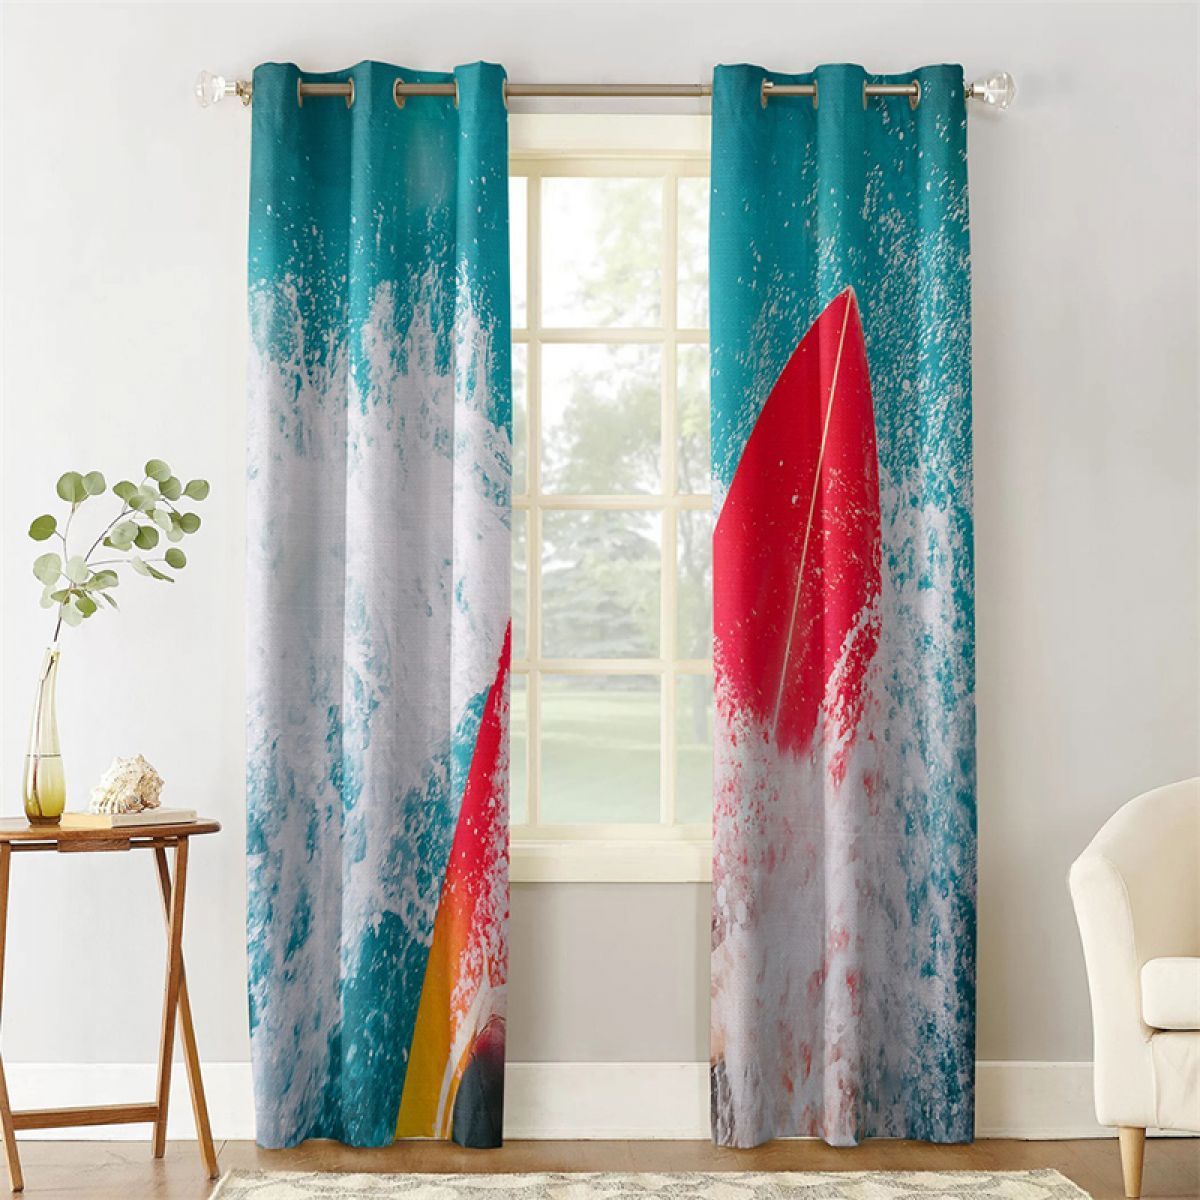 3d Surfing Printed Window Curtain Home Decor